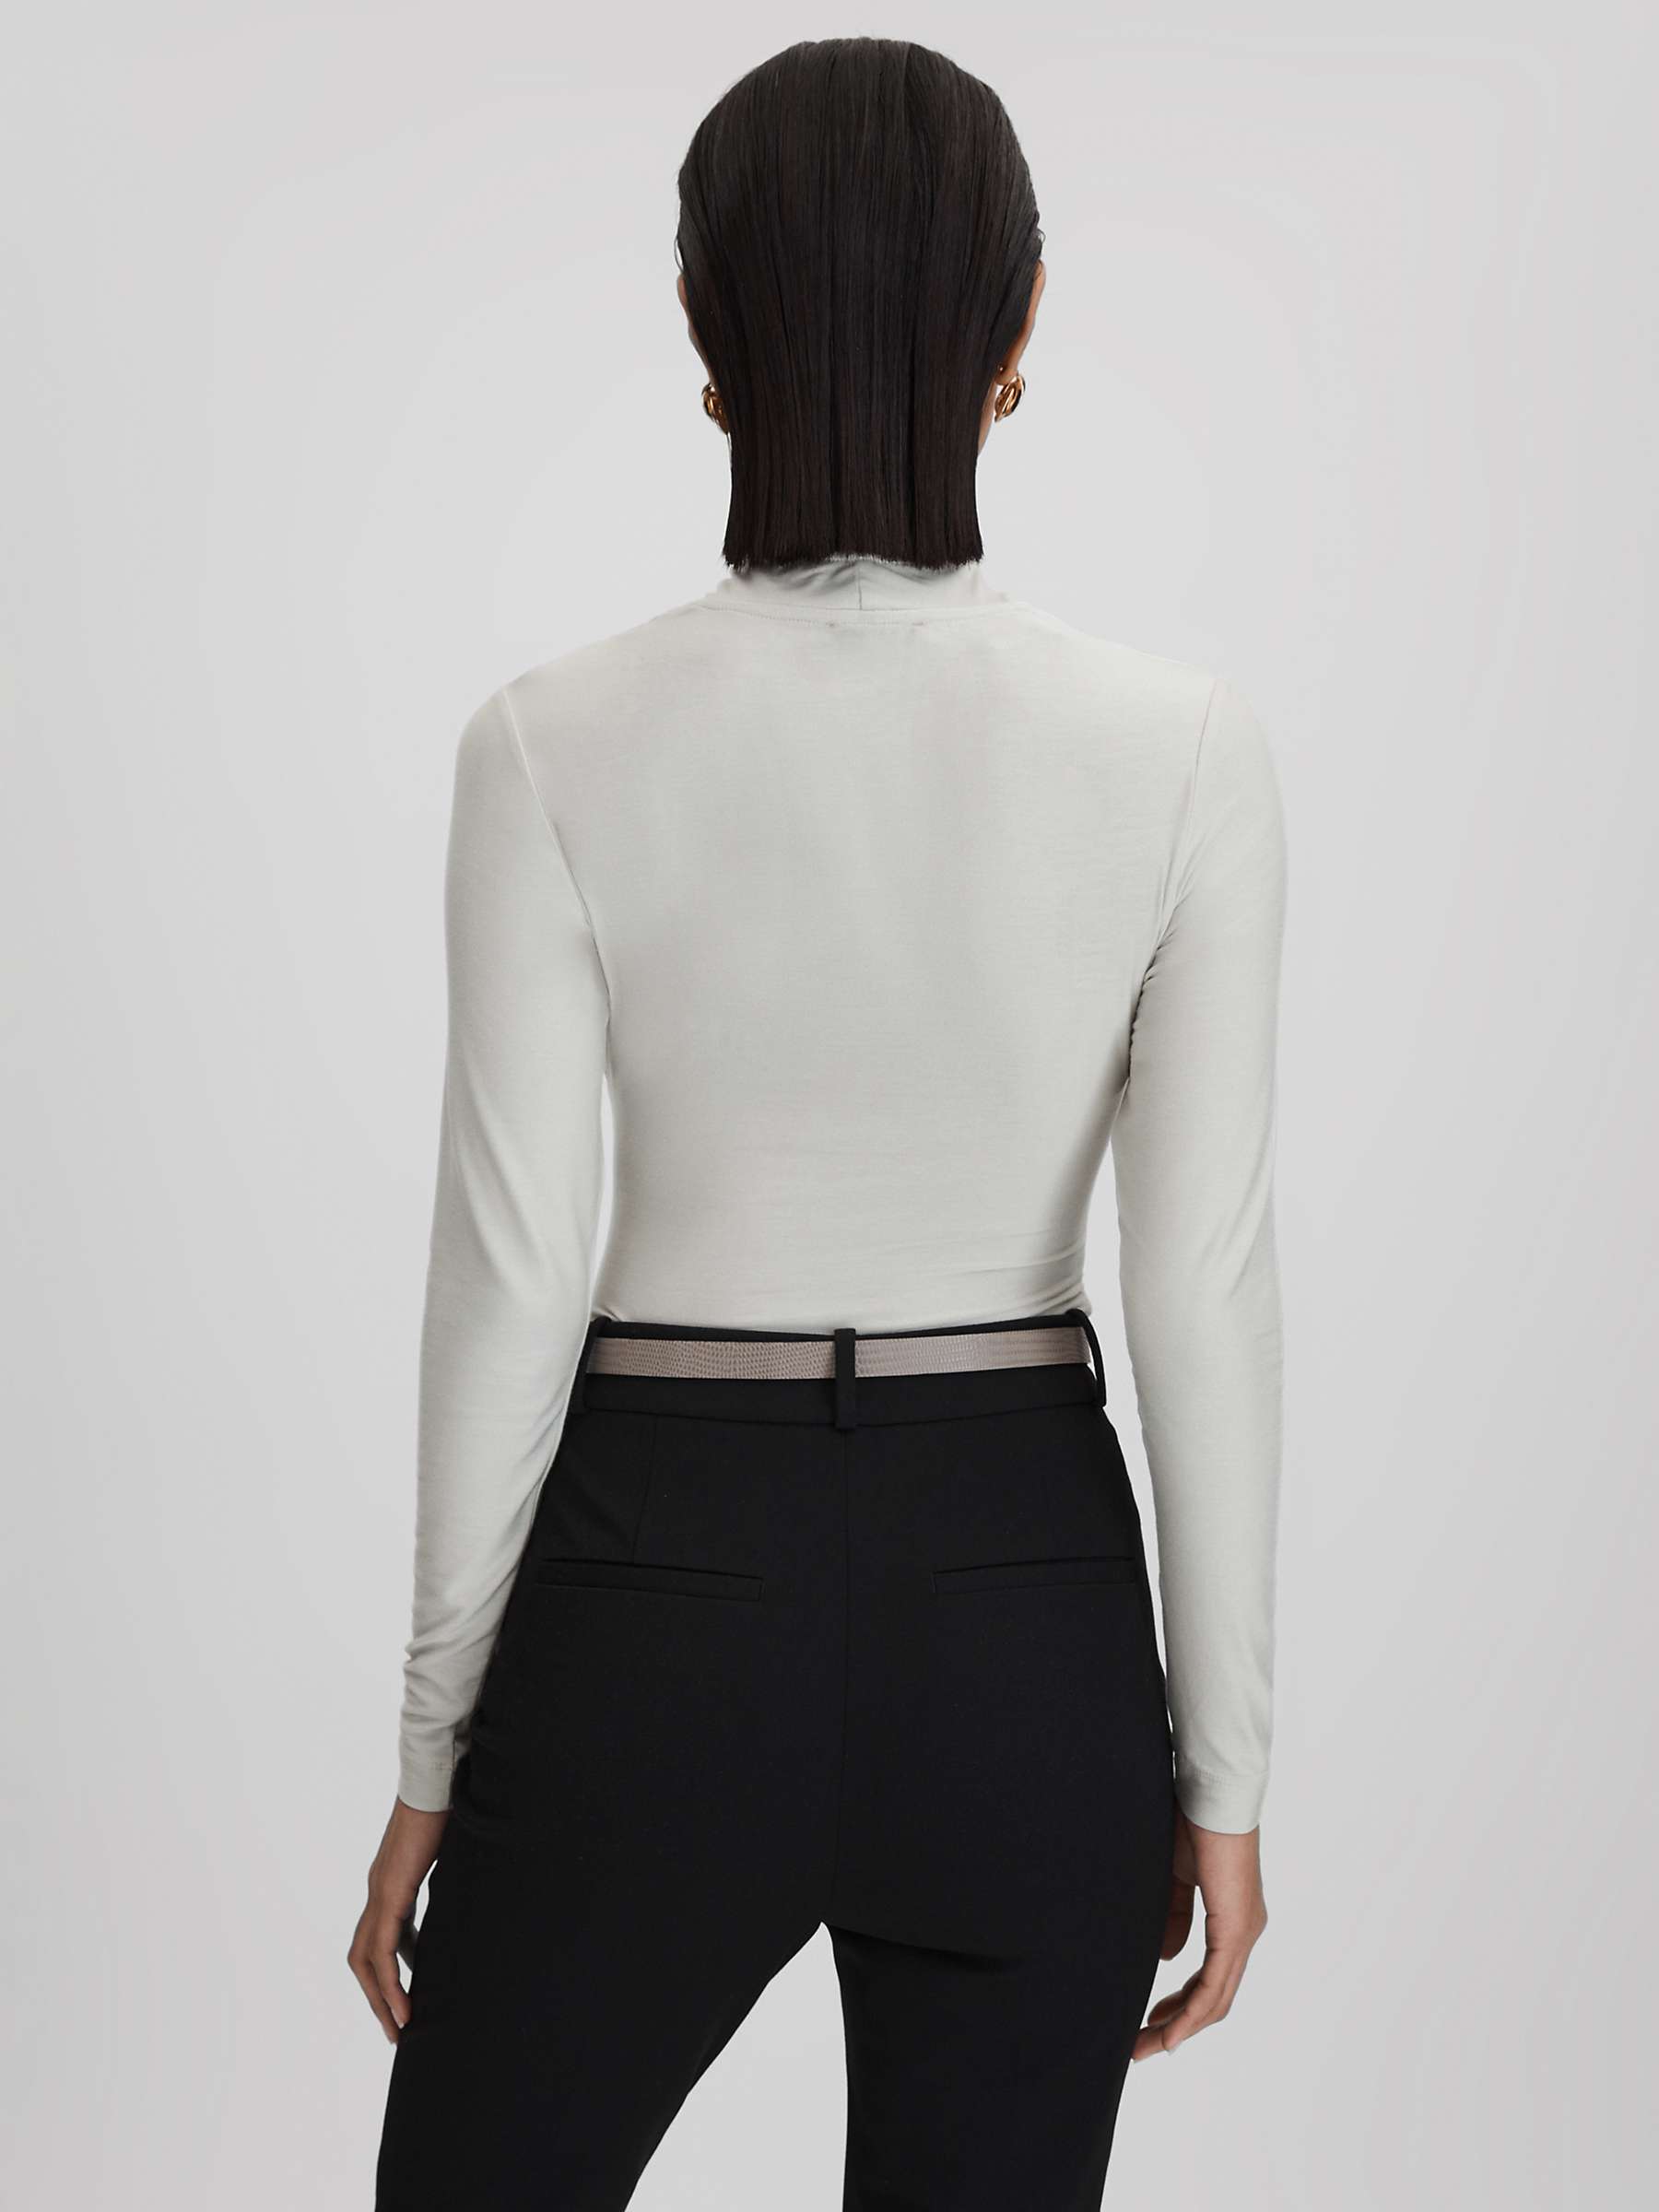 Buy Reiss Mara Ruched Wrap Front Top, Mint Online at johnlewis.com